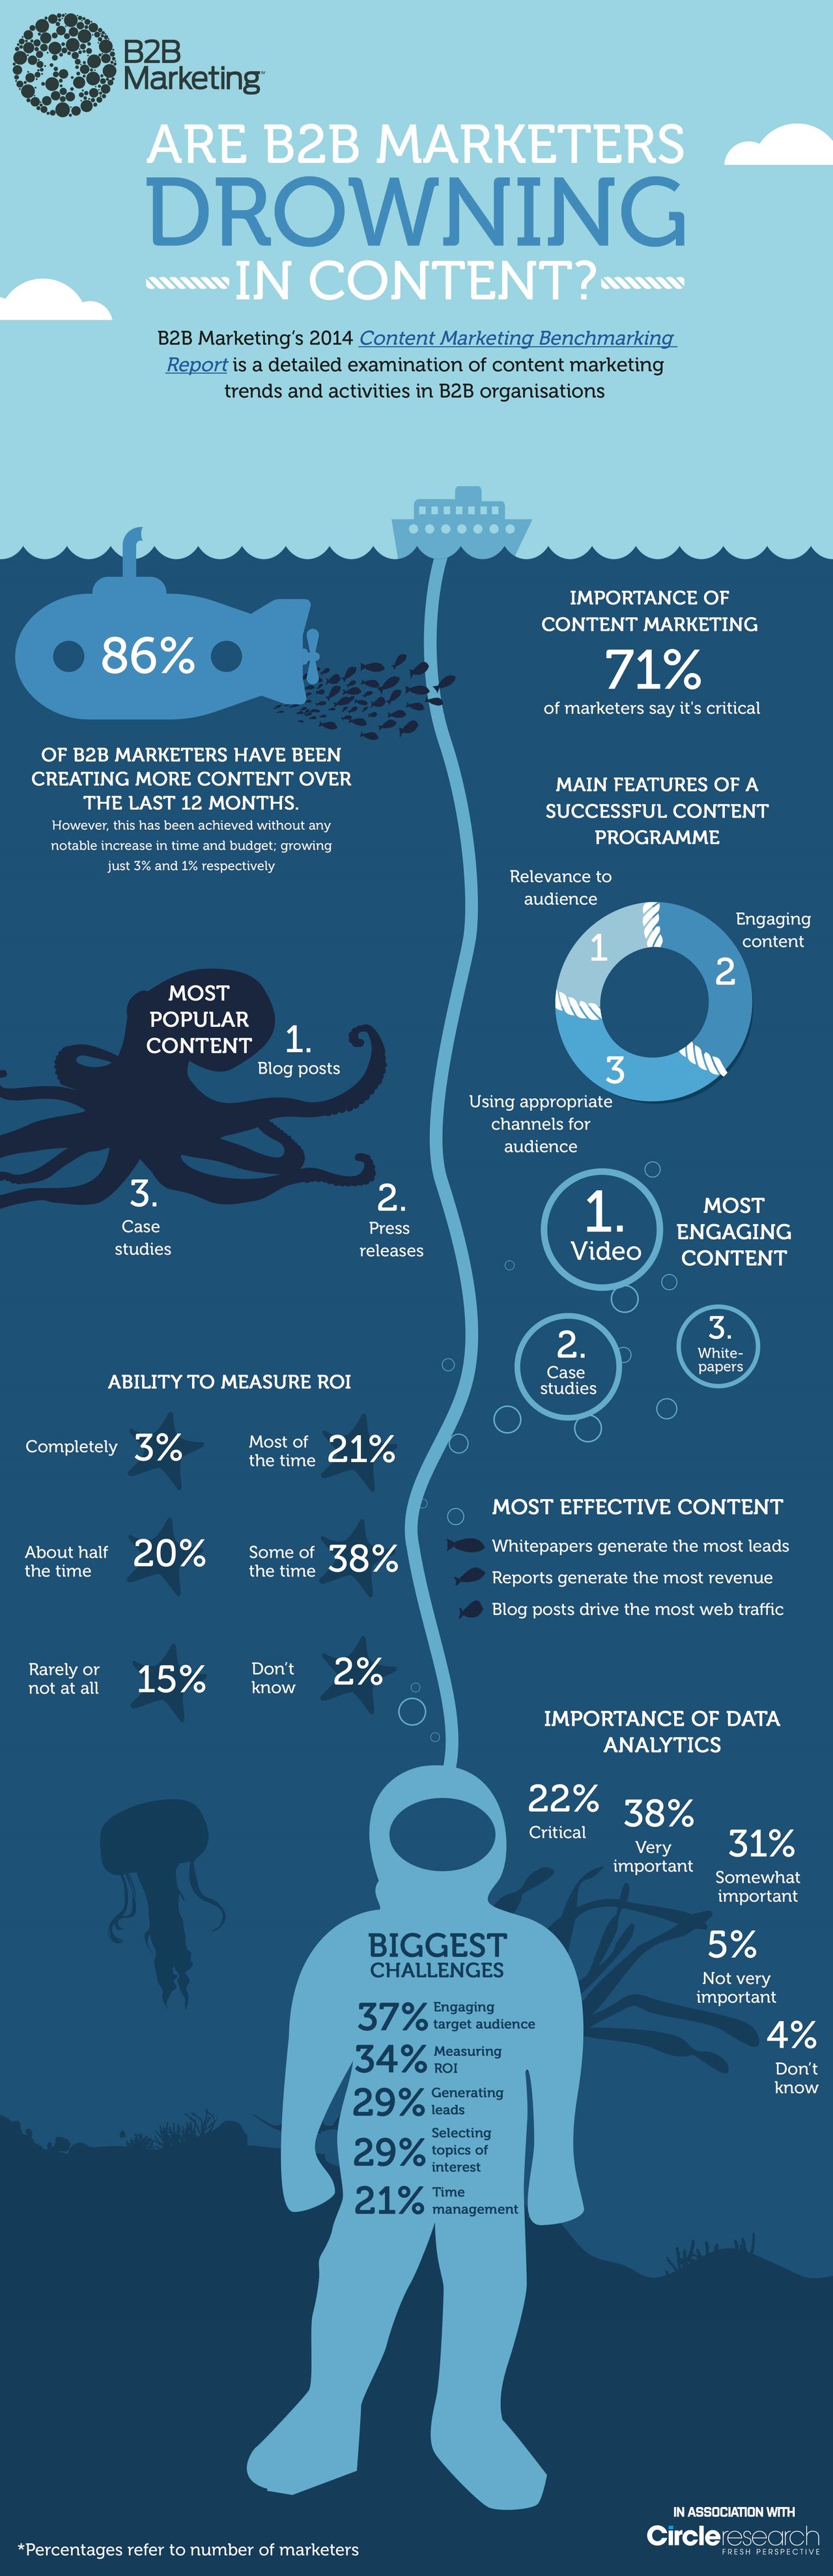 Are-B2B-marketers-drowning-in-content-top-3_takeaways-from-B2B-Marketings-Benchmarking-infographic.jpg